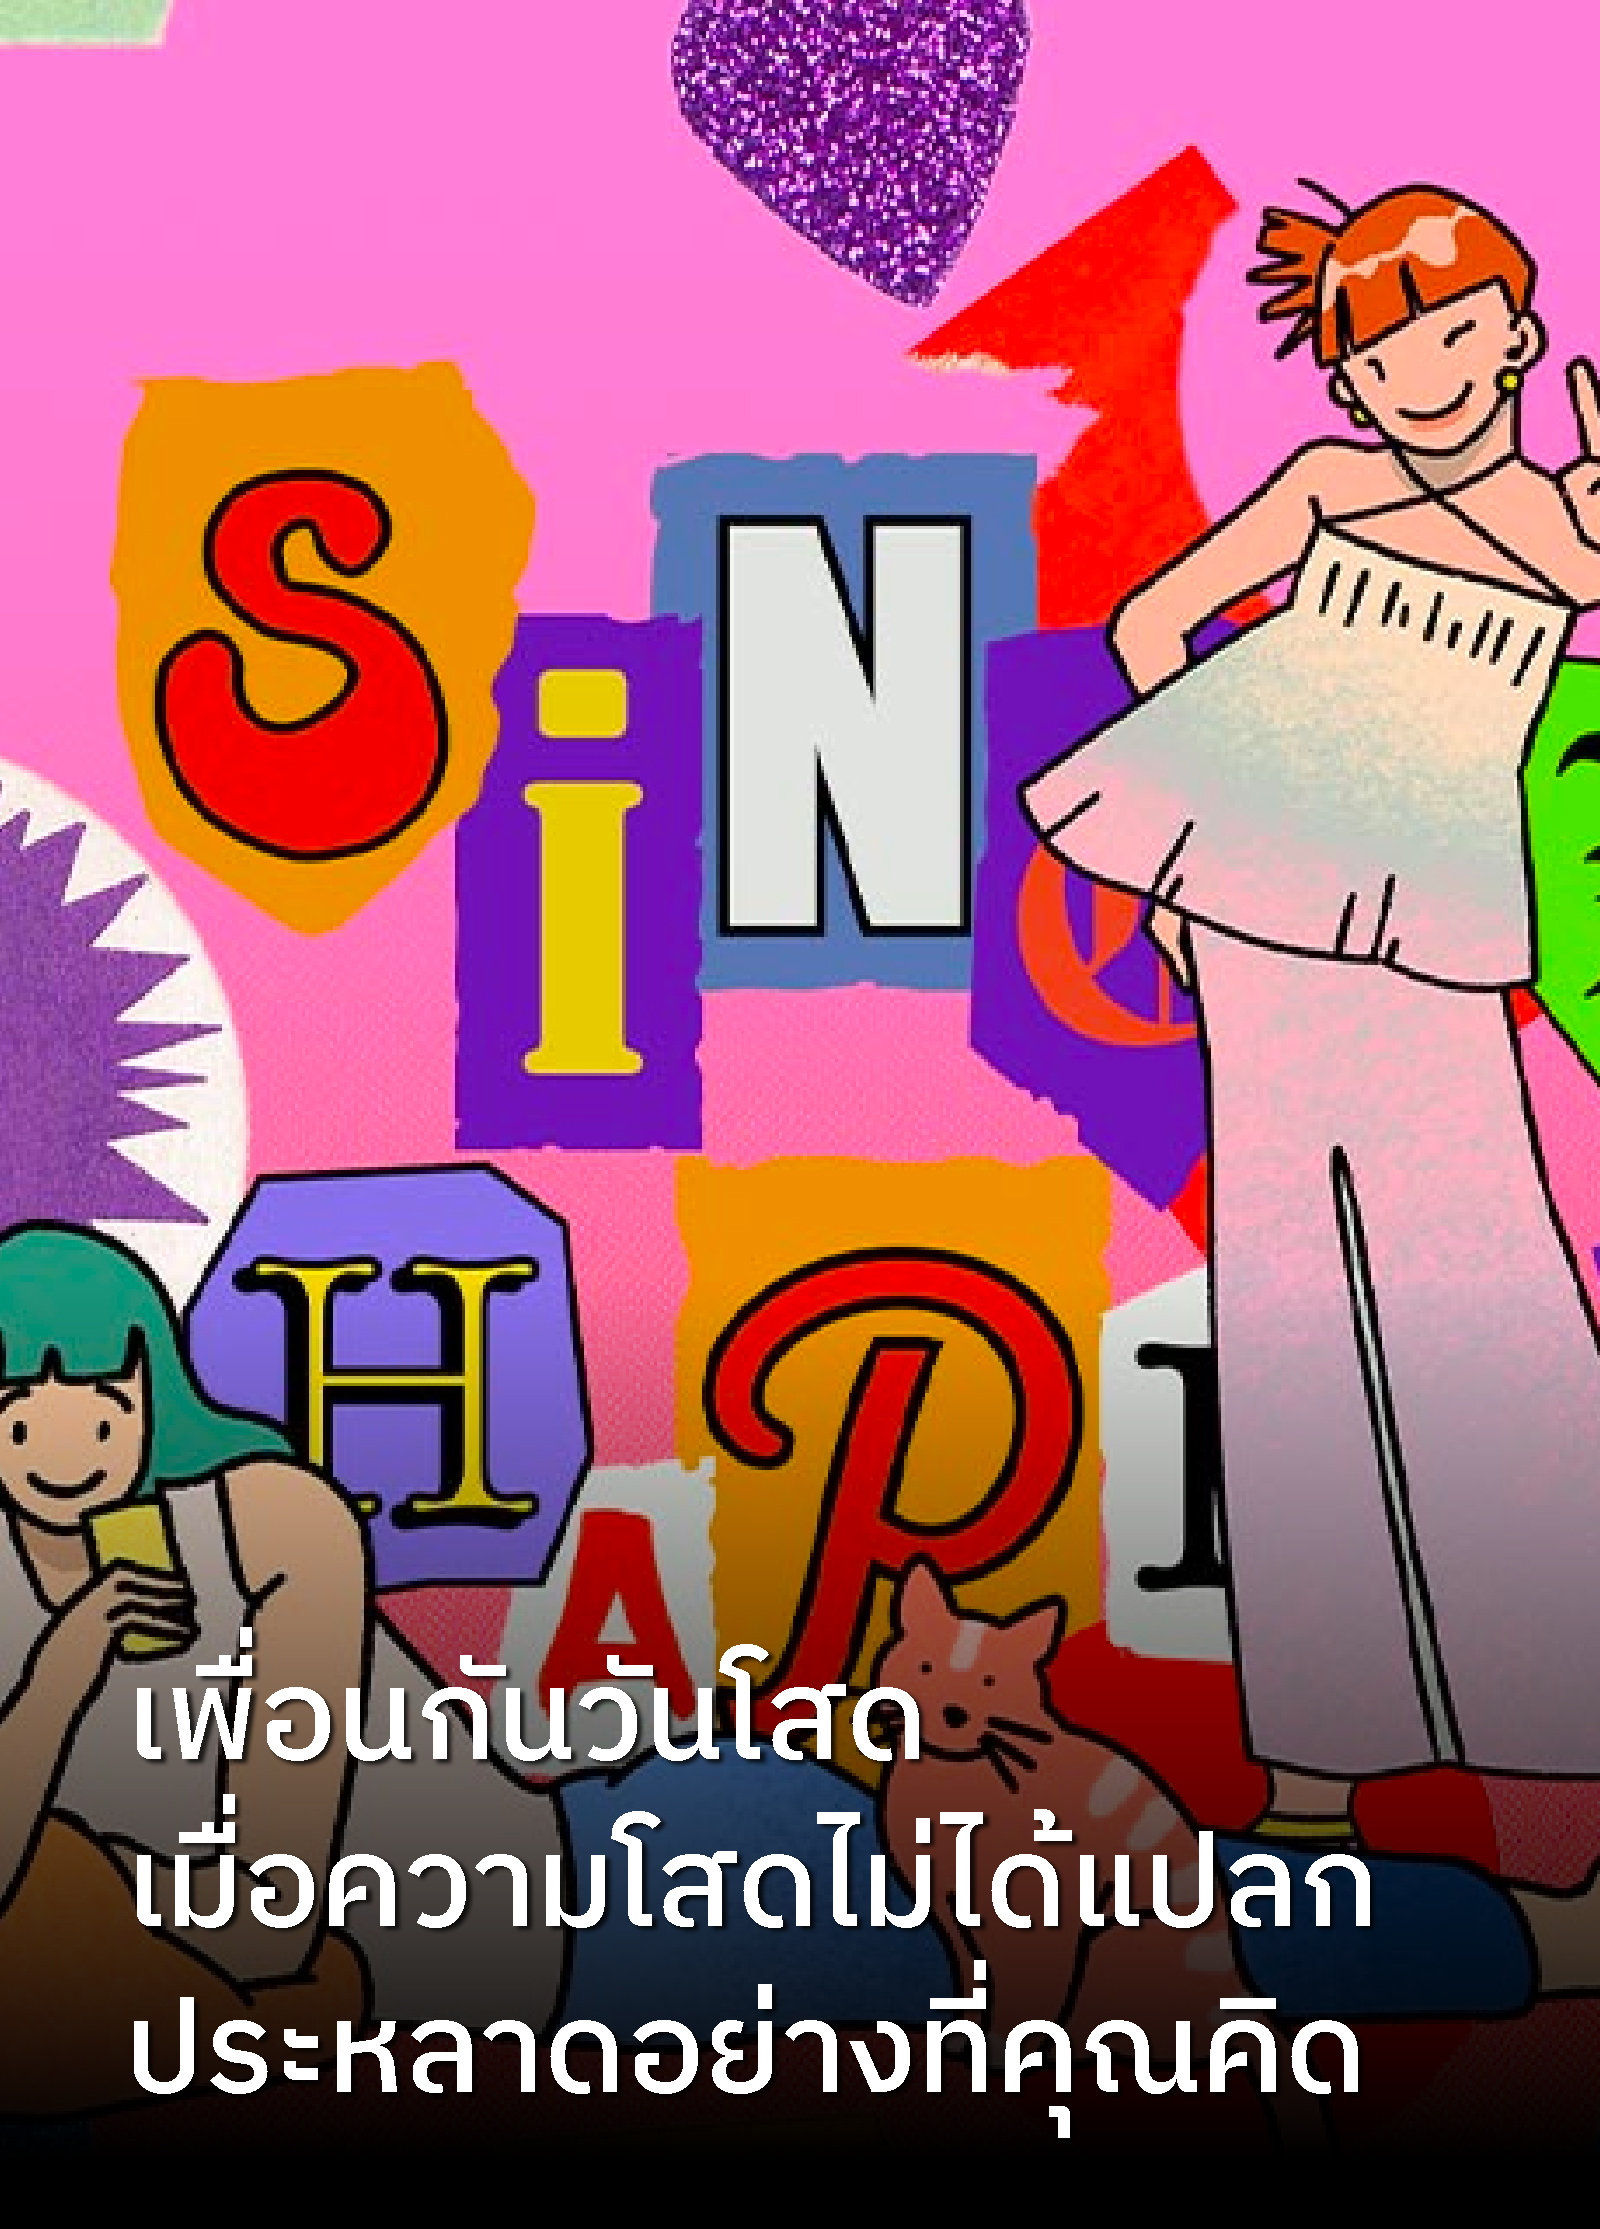 Data-Story-of-being-single-according-to-the-sentiments-of-Thai-social-media-users